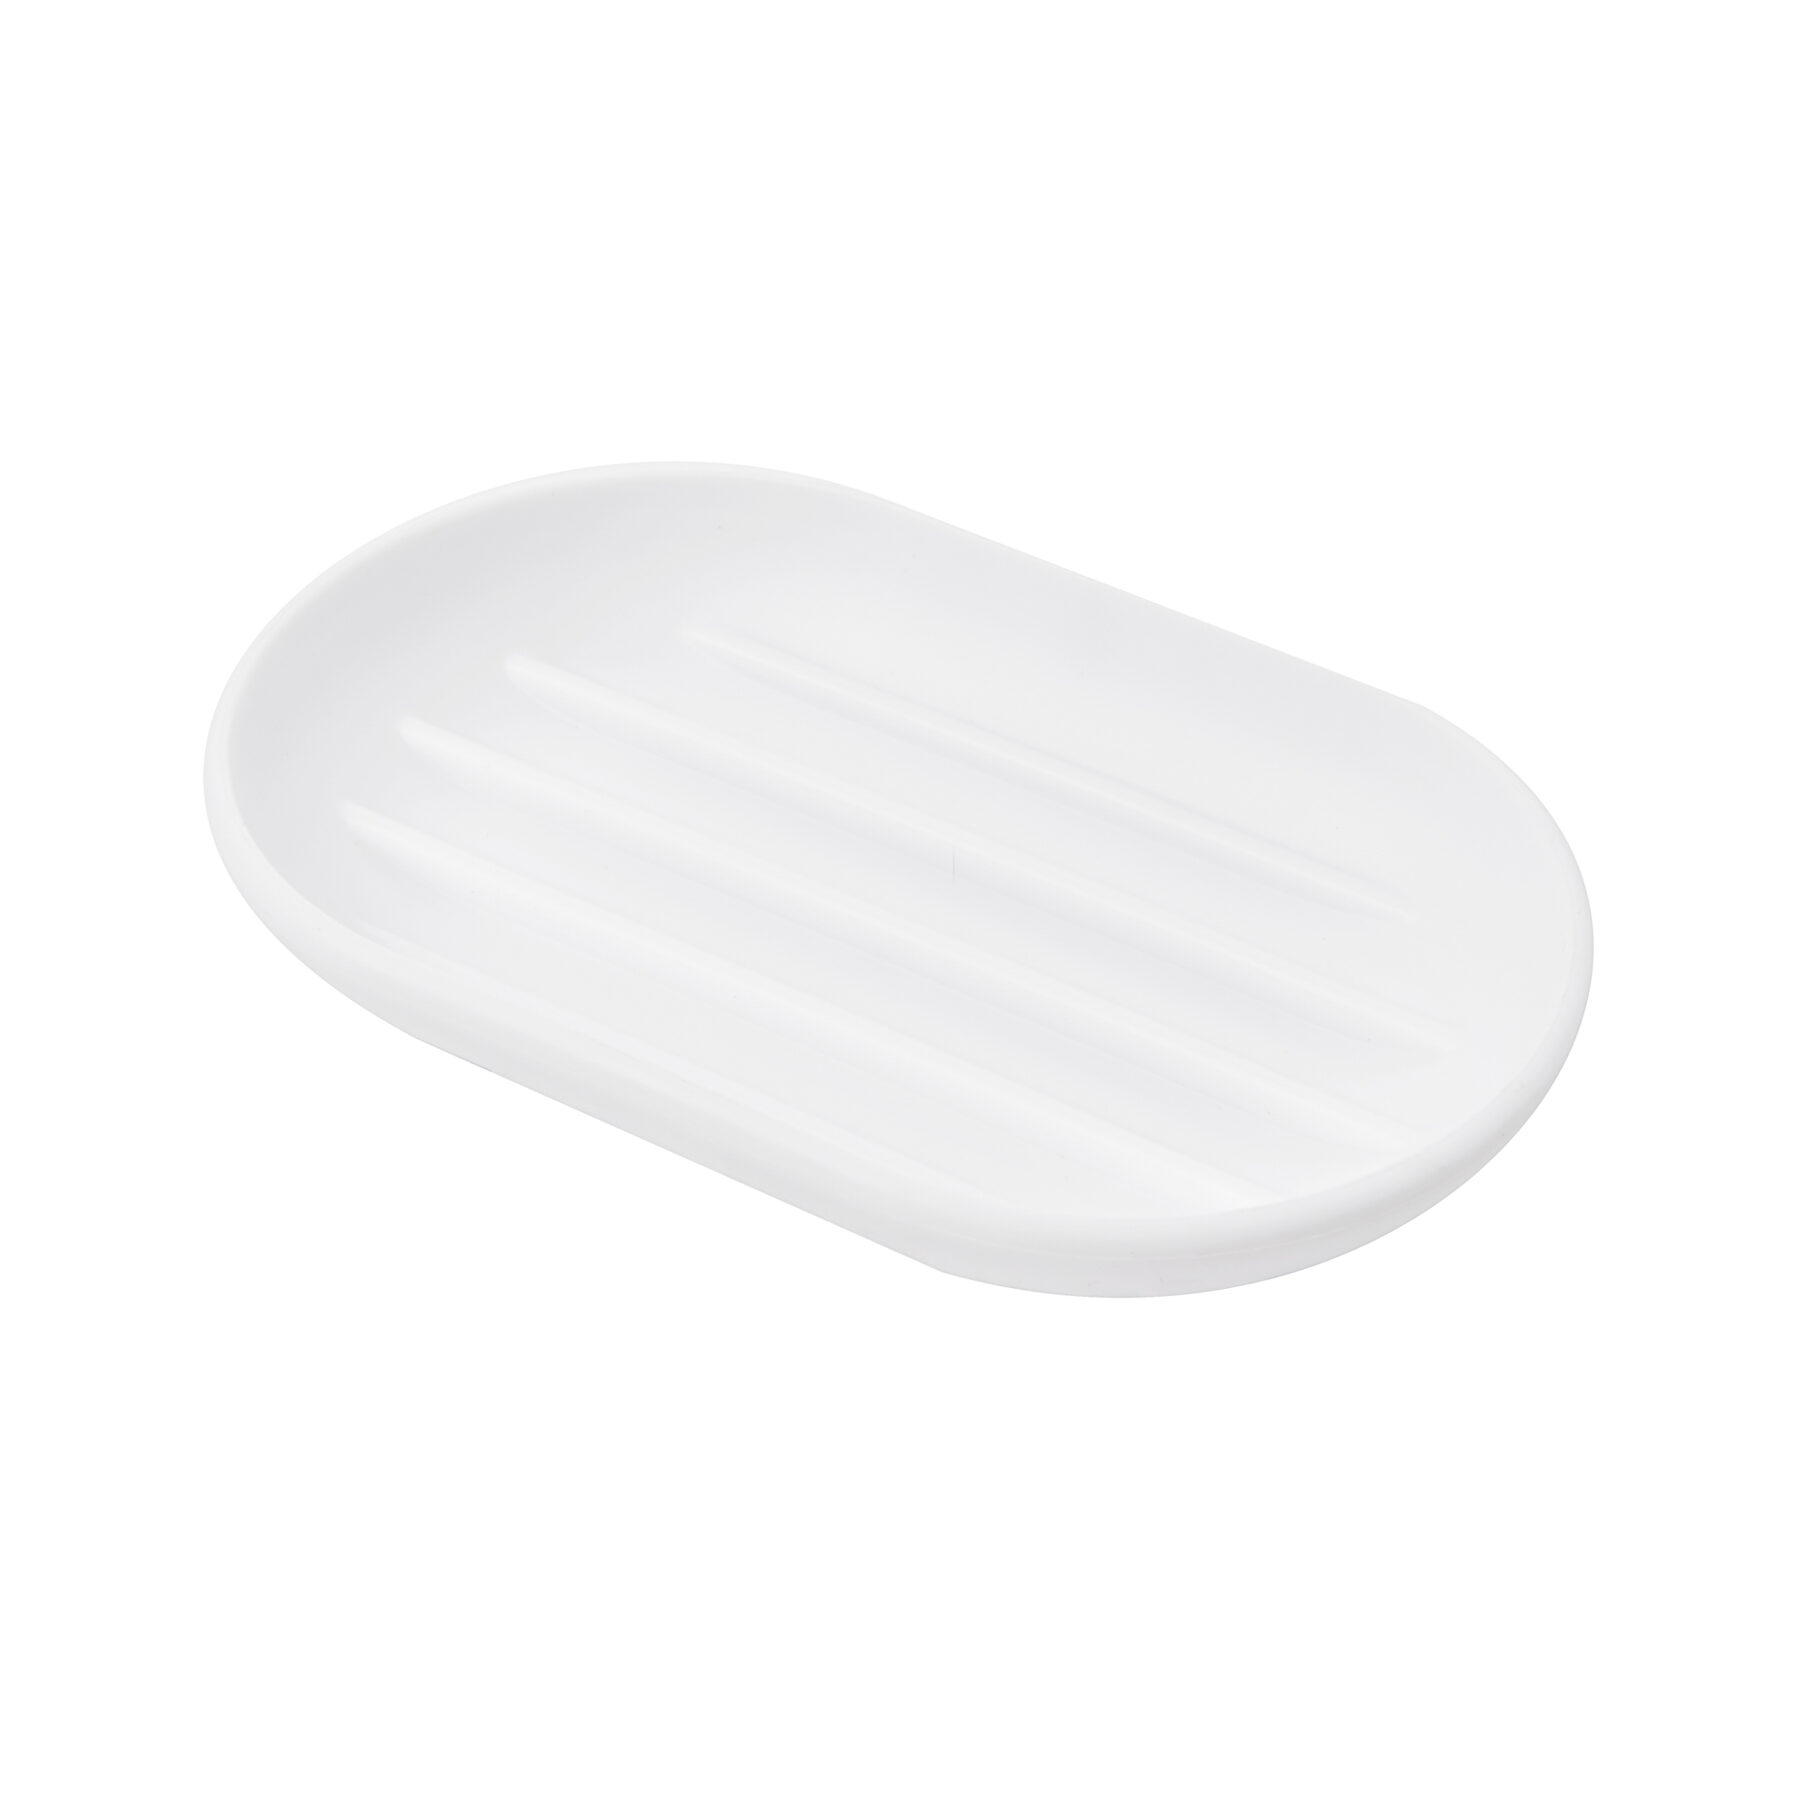 and curved shape. Its built-in ridges will keep your soap bar dry